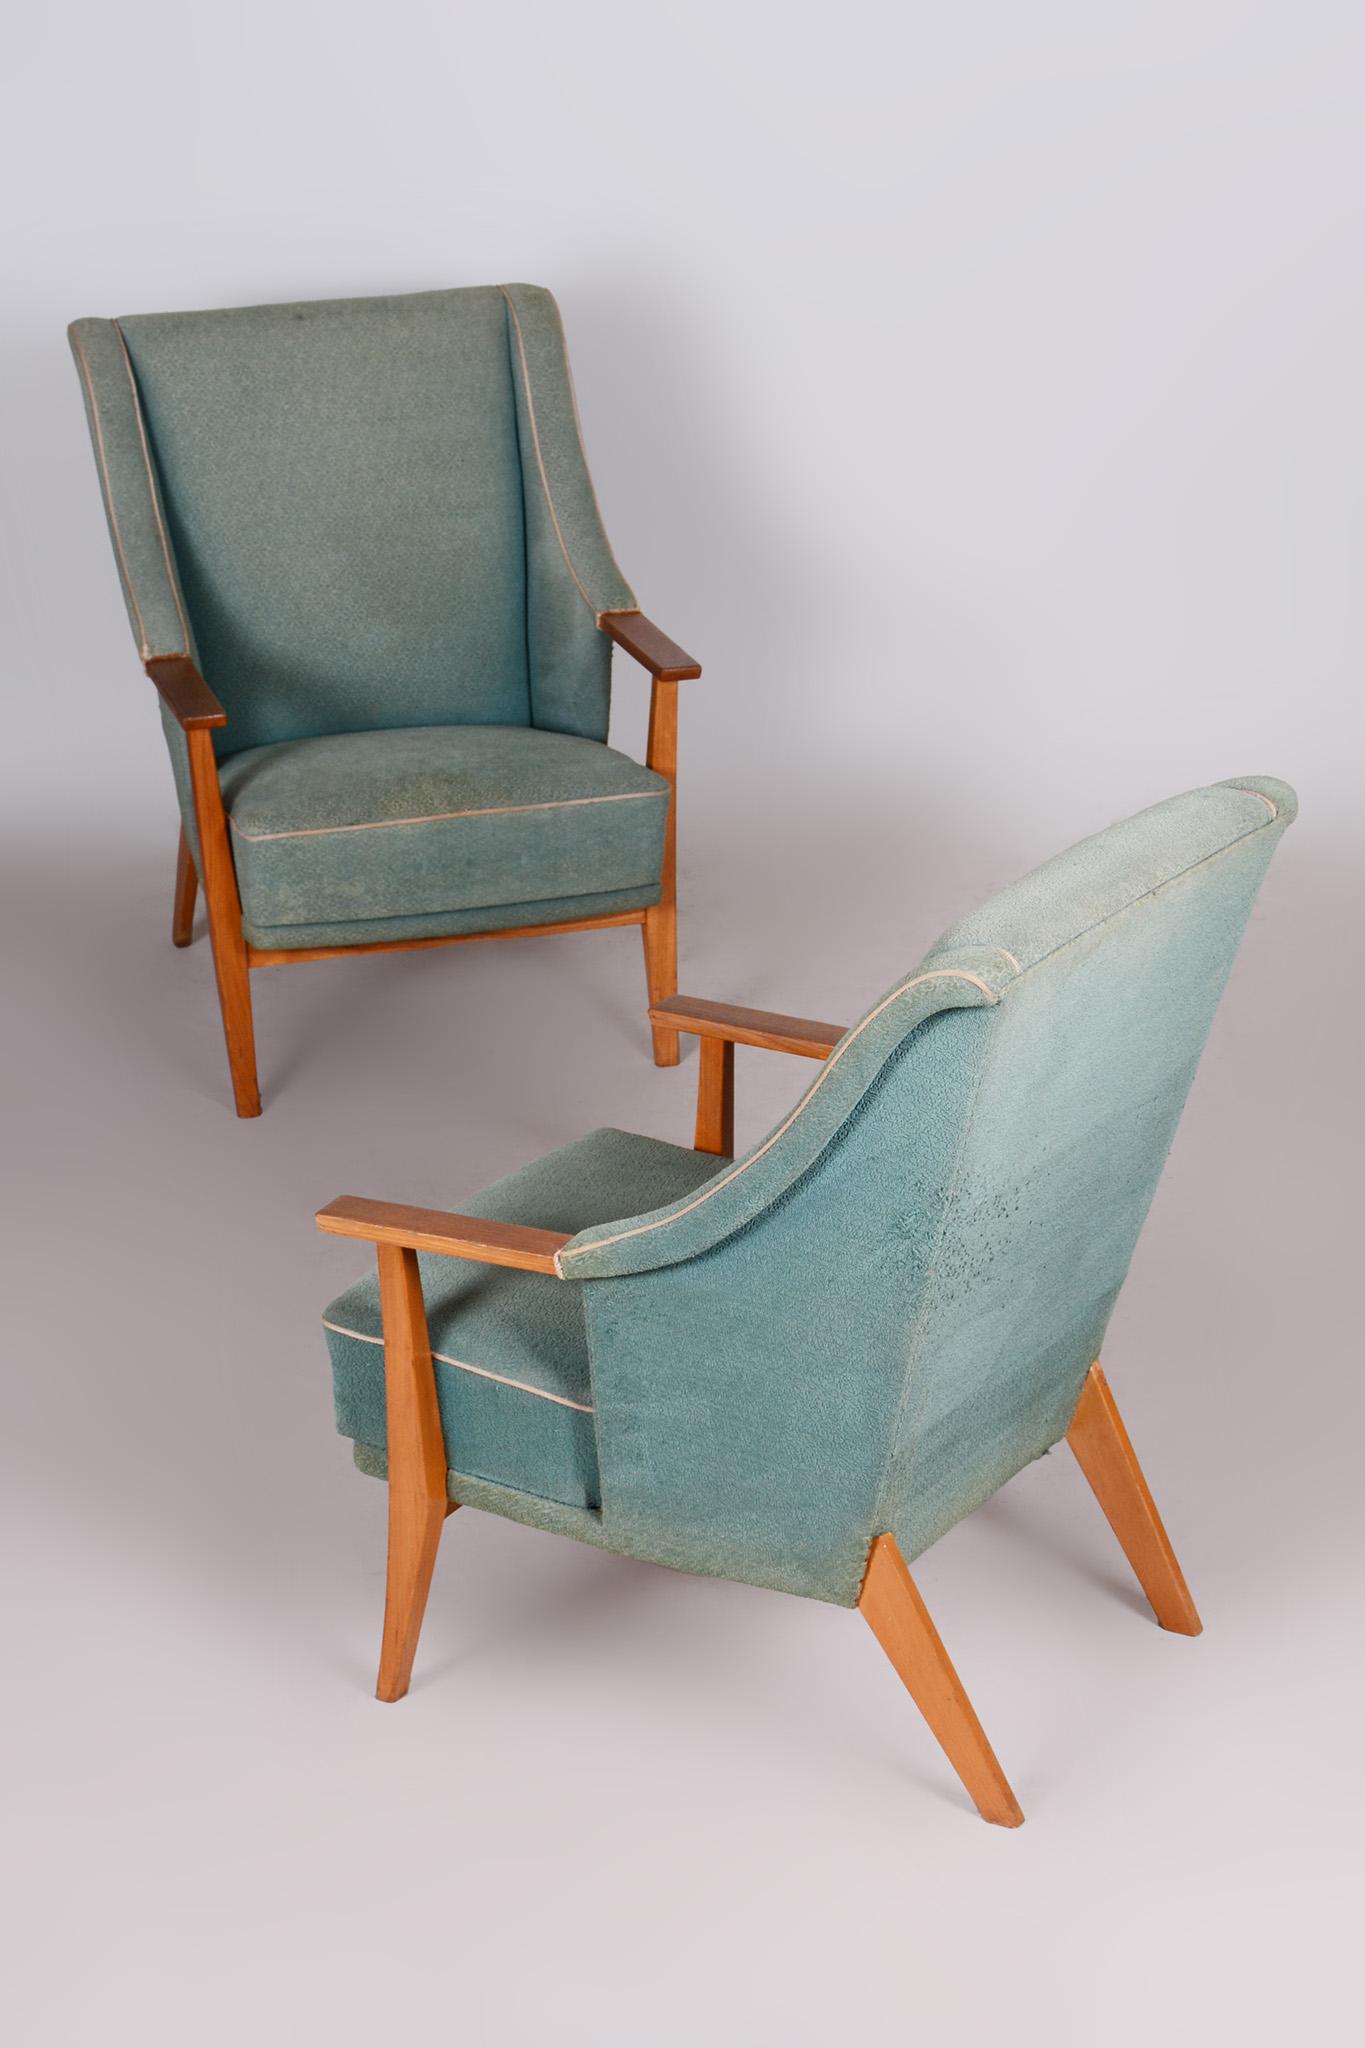 Pair of Unique Green Beech ArtDeco Armchairs Made in 1940s, Denmark For Sale 8